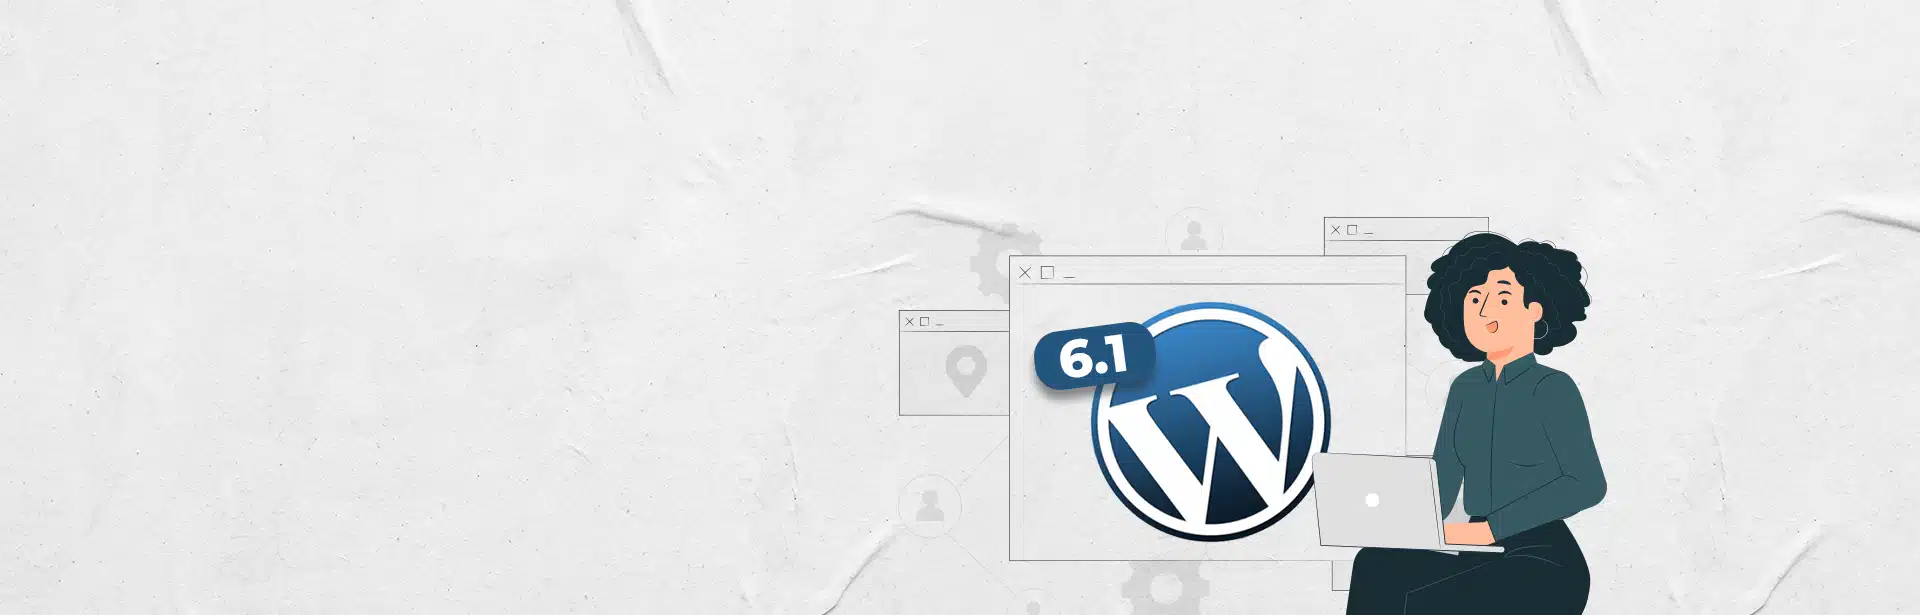 WordPress 6.1: What’s In Store For New Version